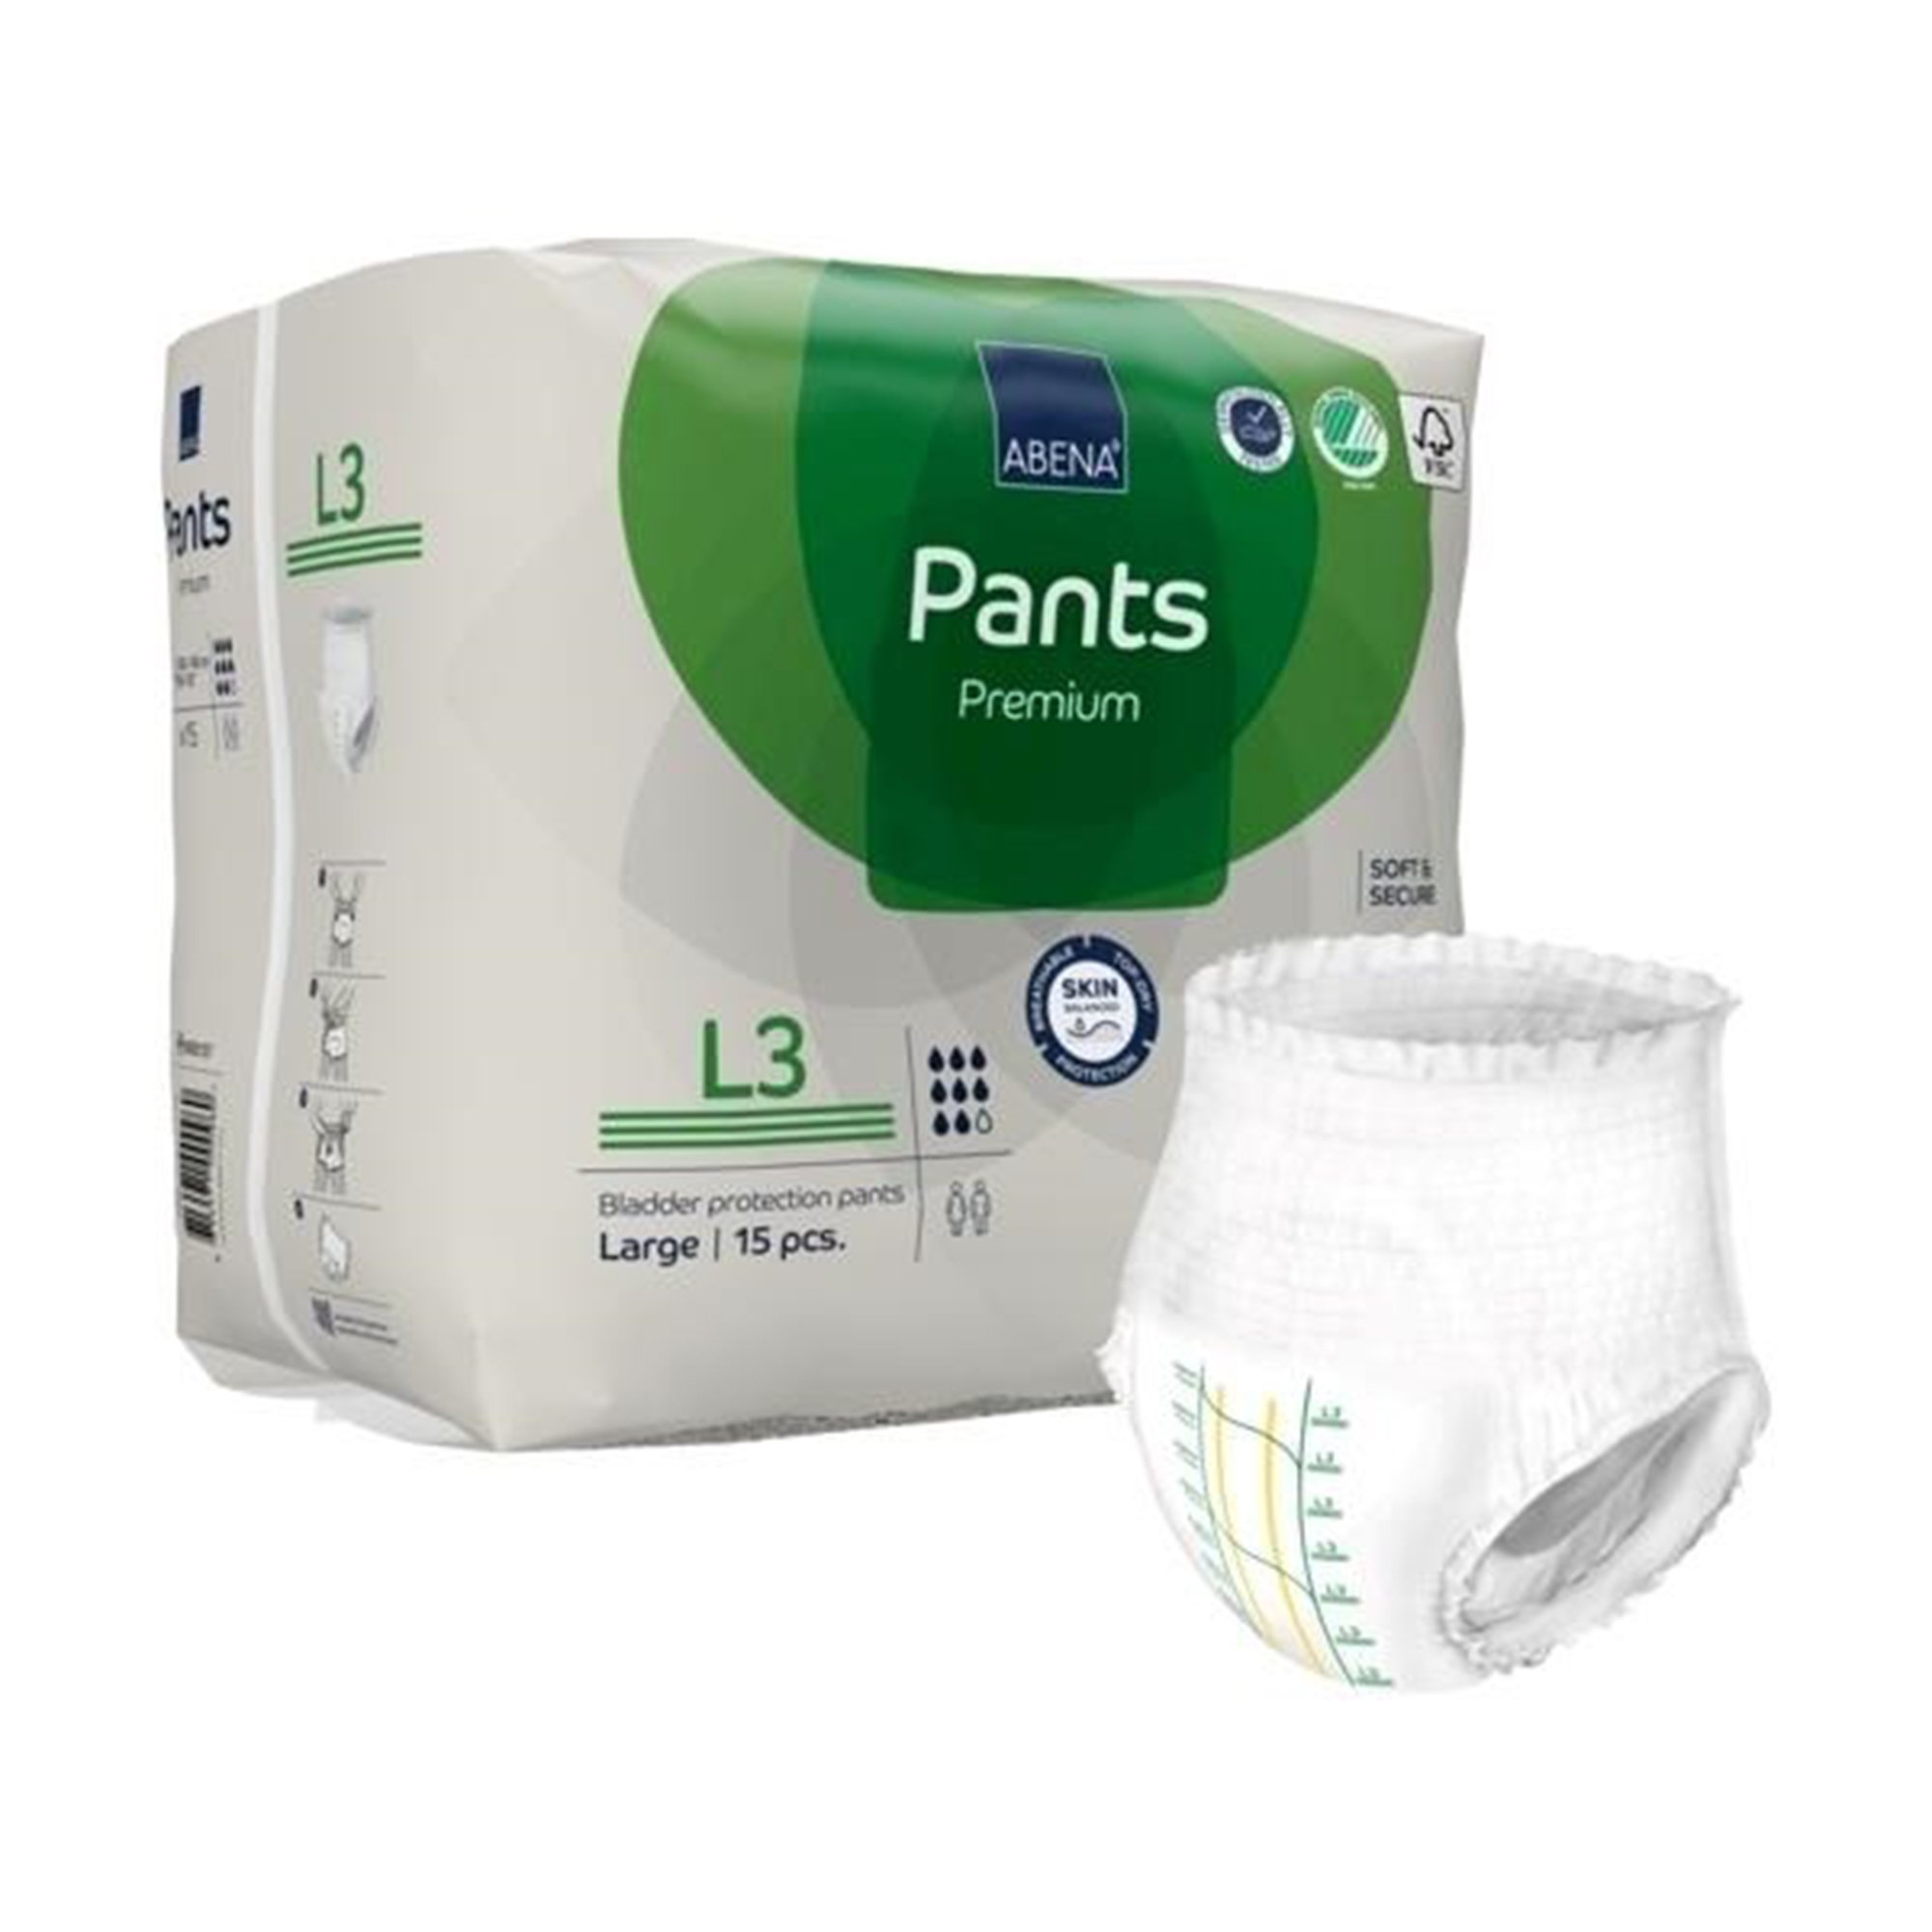 Abena Premium Pants L3 Disposable Underwear Pull On with Tear Away Seams Large, 1000021327, 90 Ct - image 1 of 7